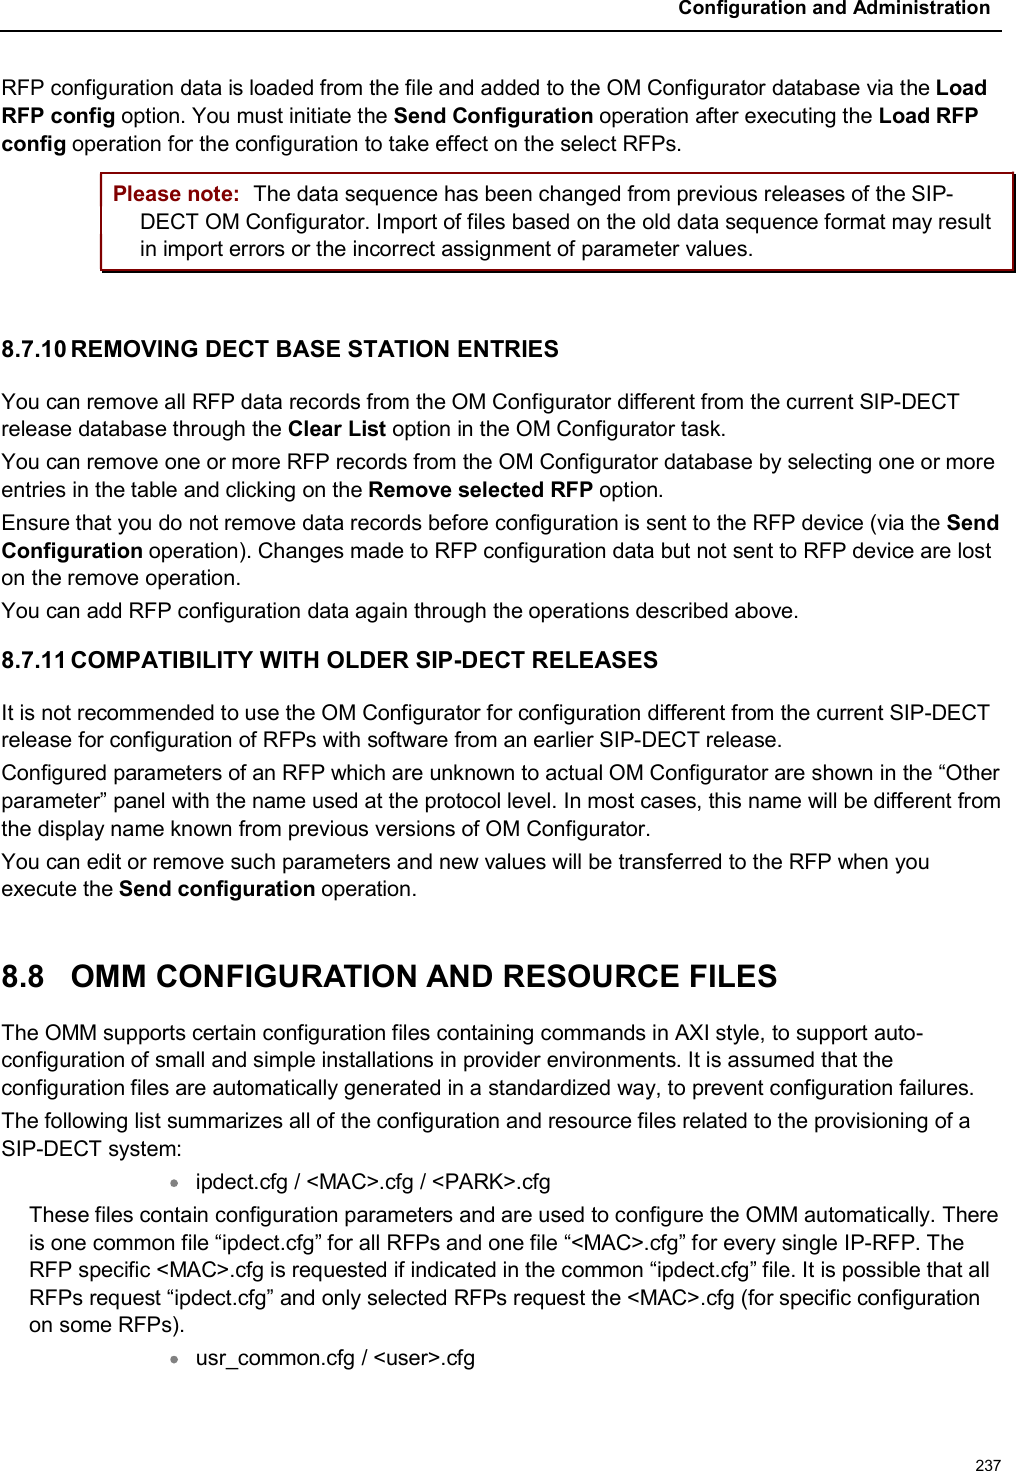 Configuration and Administration237RFP configuration data is loaded from the file and added to the OM Configurator database via the LoadRFP config option. You must initiate the Send Configuration operation after executing the Load RFP config operation for the configuration to take effect on the select RFPs.Please note: The data sequence has been changed from previous releases of the SIP-DECT OM Configurator. Import of files based on the old data sequence format may result in import errors or the incorrect assignment of parameter values. 8.7.10 REMOVING DECT BASE STATION ENTRIESYou can remove all RFP data records from the OM Configurator different from the current SIP-DECT release database through the Clear List option in the OM Configurator task. You can remove one or more RFP records from the OM Configurator database by selecting one or more entries in the table and clicking on the Remove selected RFP option.Ensure that you do not remove data records before configuration is sent to the RFP device (via the Send Configuration operation). Changes made to RFP configuration data but not sent to RFP device are lost on the remove operation.You can add RFP configuration data again through the operations described above.8.7.11 COMPATIBILITY WITH OLDER SIP-DECT RELEASESIt is not recommended to use the OM Configurator for configuration different from the current SIP-DECT release for configuration of RFPs with software from an earlier SIP-DECT release.Configured parameters of an RFP which are unknown to actual OM Configurator are shown in the “Other parameter” panel with the name used at the protocol level. In most cases, this name will be different from the display name known from previous versions of OM Configurator.You can edit or remove such parameters and new values will be transferred to the RFP when you execute the Send configuration operation.8.8 OMM CONFIGURATION AND RESOURCE FILESThe OMM supports certain configuration files containing commands in AXI style, to support auto-configuration of small and simple installations in provider environments. It is assumed that the configuration files are automatically generated in a standardized way, to prevent configuration failures.The following list summarizes all of the configuration and resource files related to the provisioning of a SIP-DECT system:ipdect.cfg / &lt;MAC&gt;.cfg / &lt;PARK&gt;.cfg These files contain configuration parameters and are used to configure the OMM automatically. There is one common file “ipdect.cfg” for all RFPs and one file “&lt;MAC&gt;.cfg” for every single IP-RFP. The RFP specific &lt;MAC&gt;.cfg is requested if indicated in the common “ipdect.cfg” file. It is possible that all RFPs request “ipdect.cfg” and only selected RFPs request the &lt;MAC&gt;.cfg (for specific configuration on some RFPs).usr_common.cfg / &lt;user&gt;.cfg